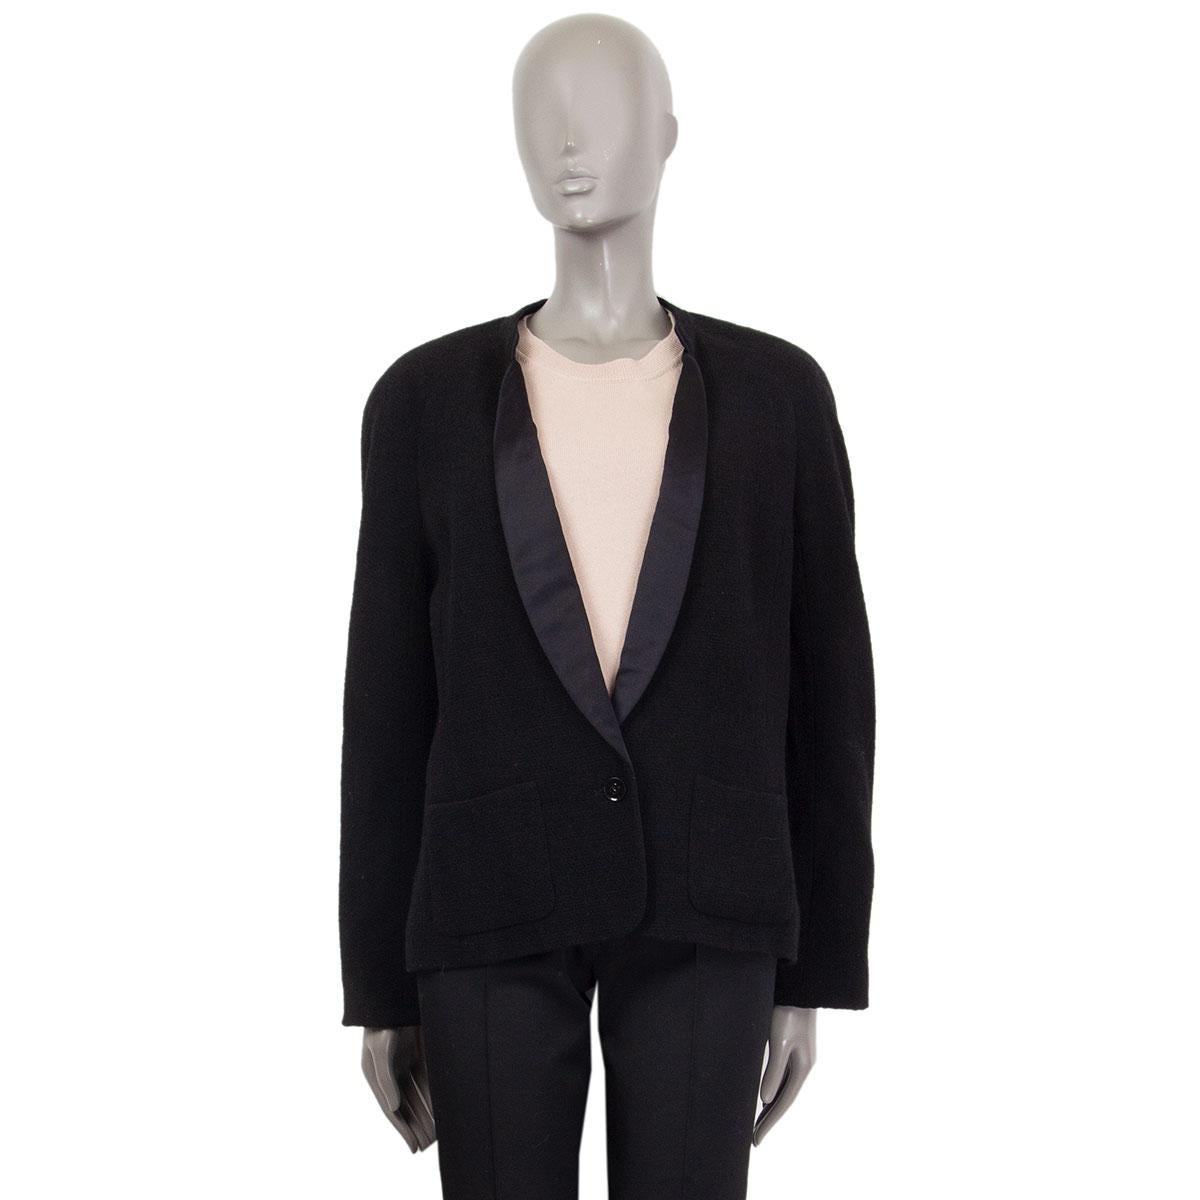 authentic Chanel Tuxedo jacket in black wool (97%) and nylon (3%). Collar is made of black silk (100%). Has two front patch-pockets. Lined in black silk (100%). Has been worn and is in excellent condition. 

Tag Size 46
Size XL
Shoulder Width 46cm